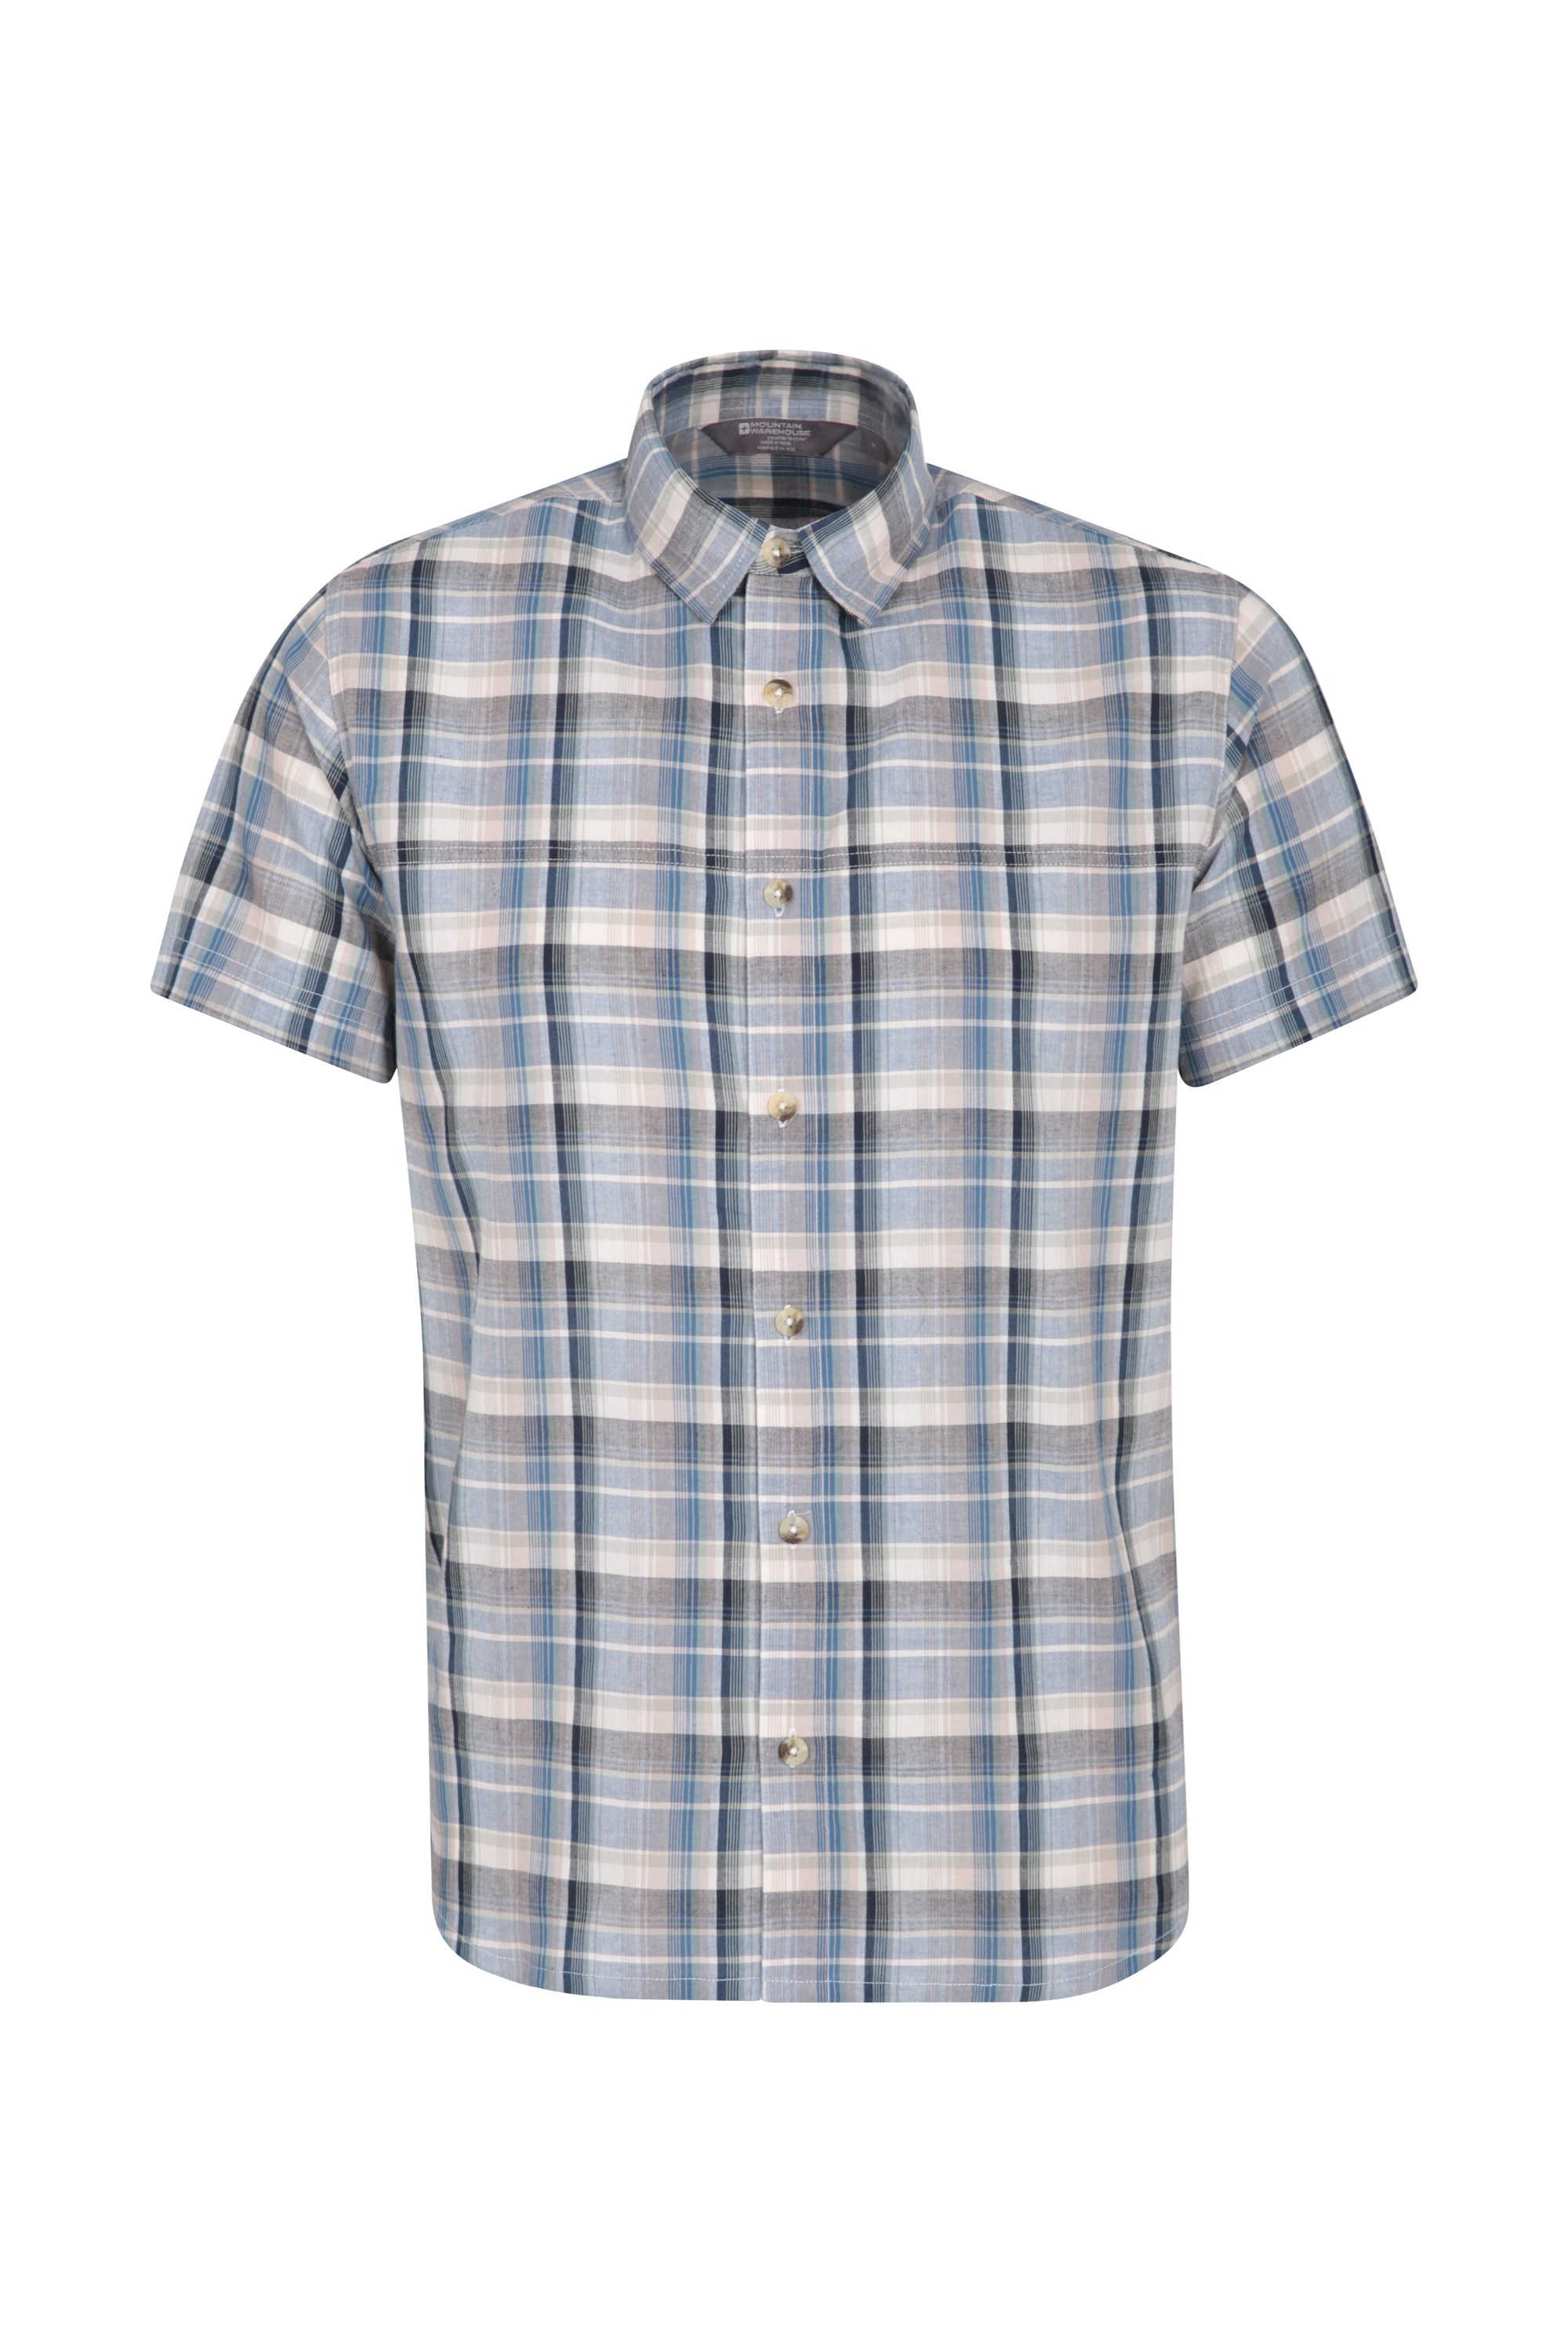 Chemise Hommes Vacation Check - Gris